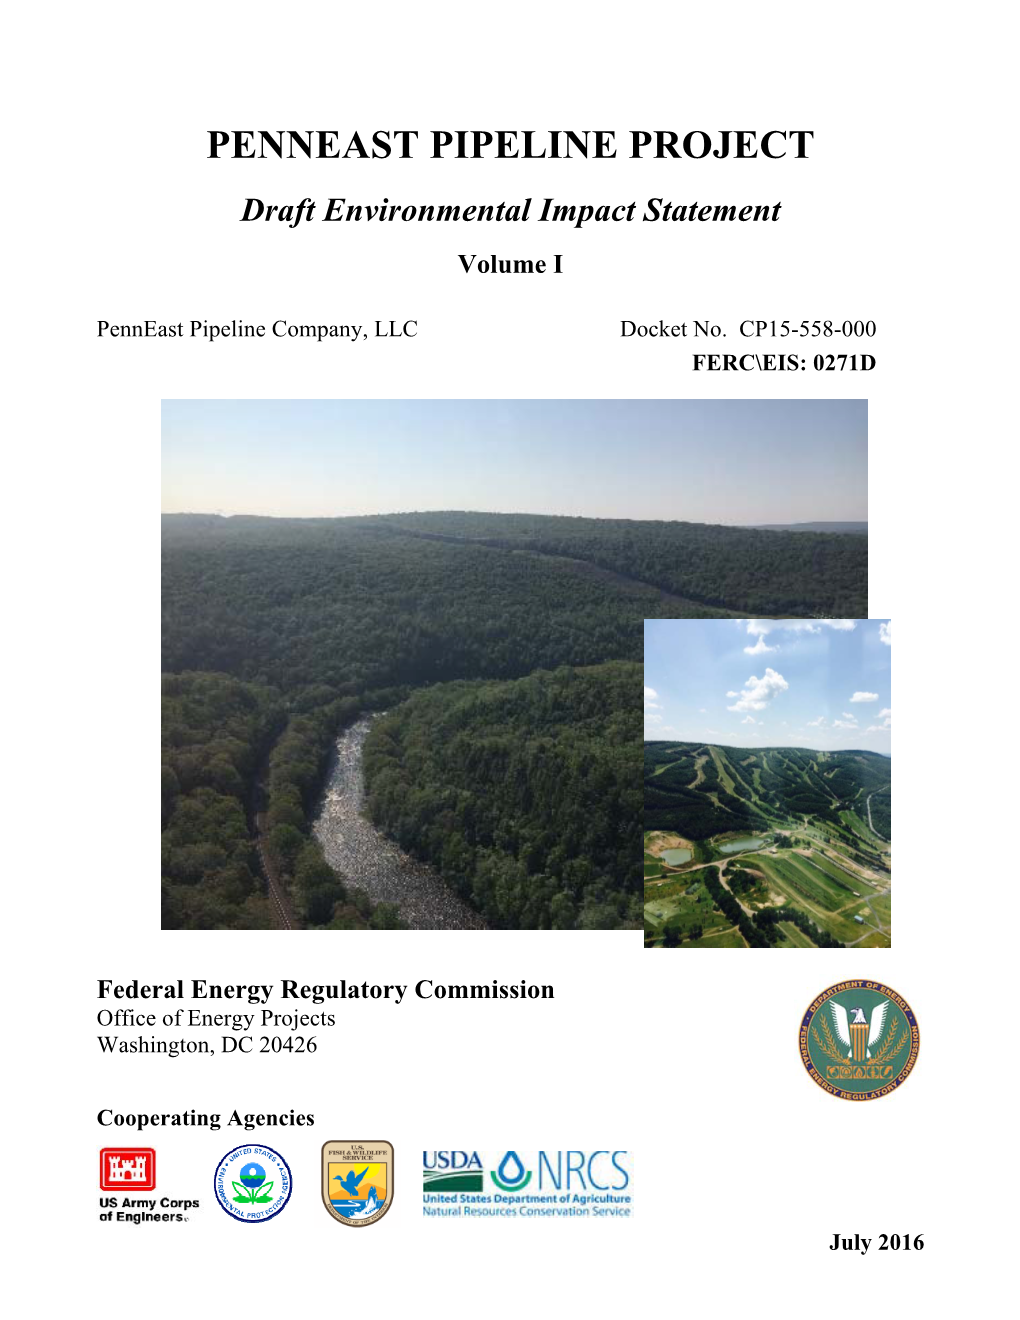 Penneast Pipeline Project Draft Enviornmental Impact Statement